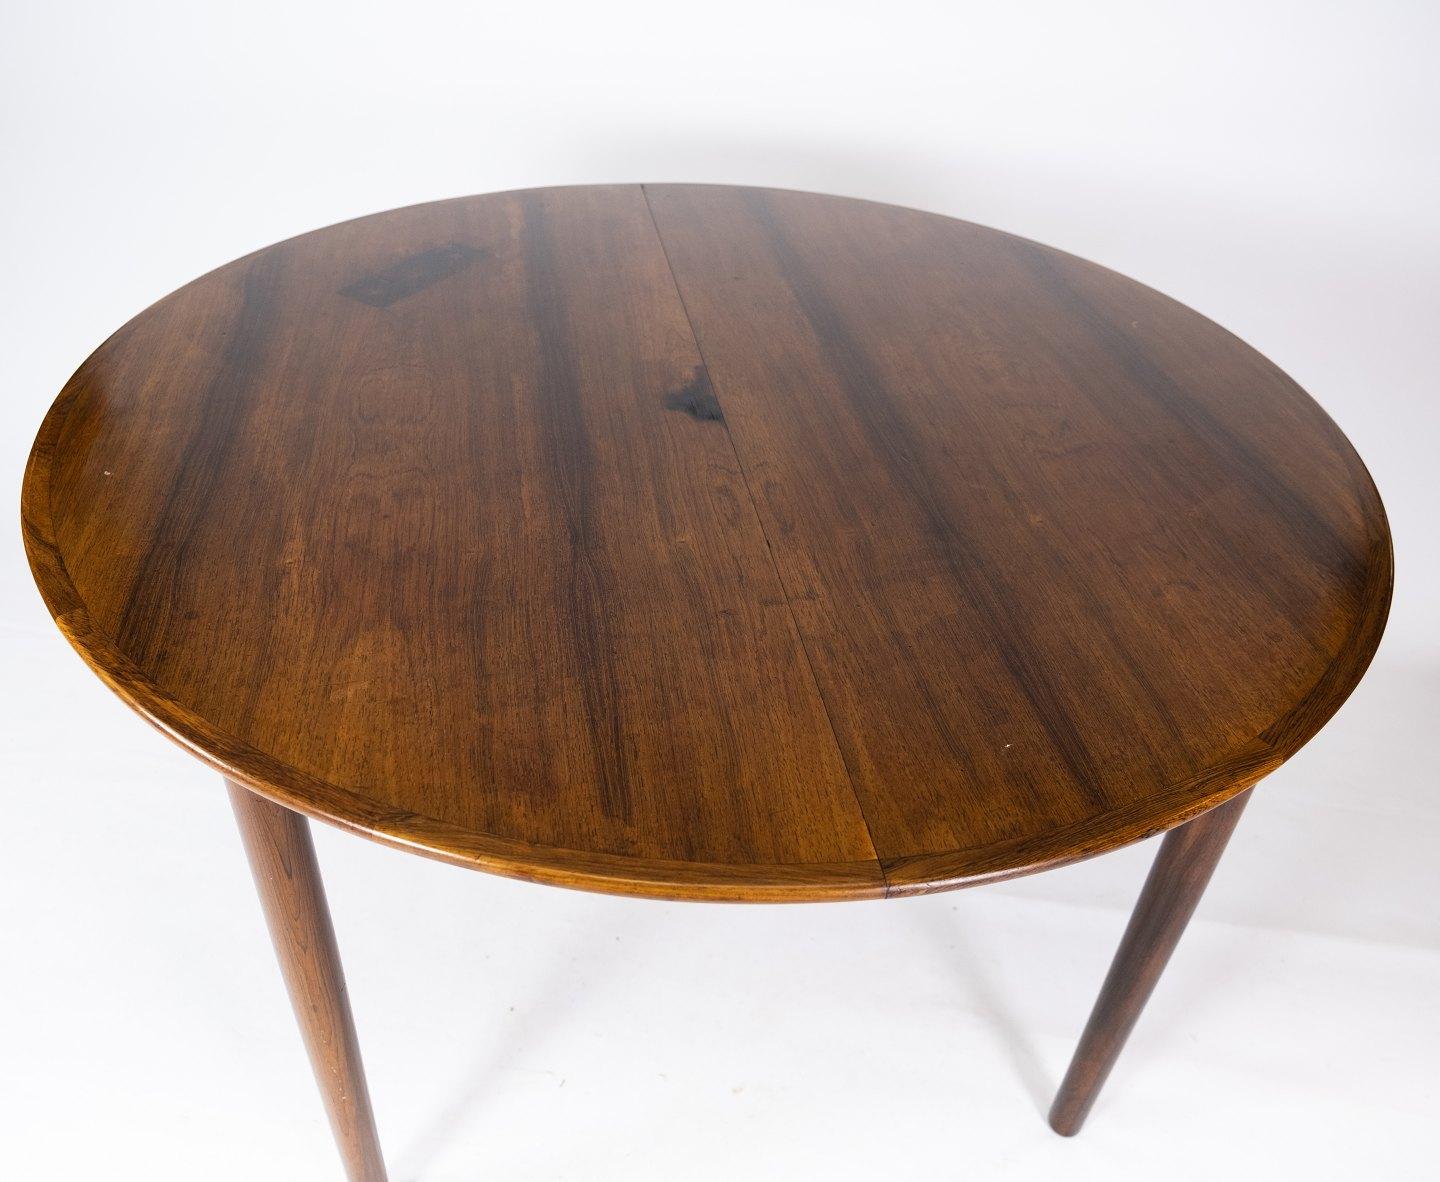 This rosewood dining table, designed by Arne Vodder in the 1960s, is a remarkable example of Danish furniture design from this era. The warm colors and beautiful patterns of the rosewood give the table an elegant and sophisticated appearance that